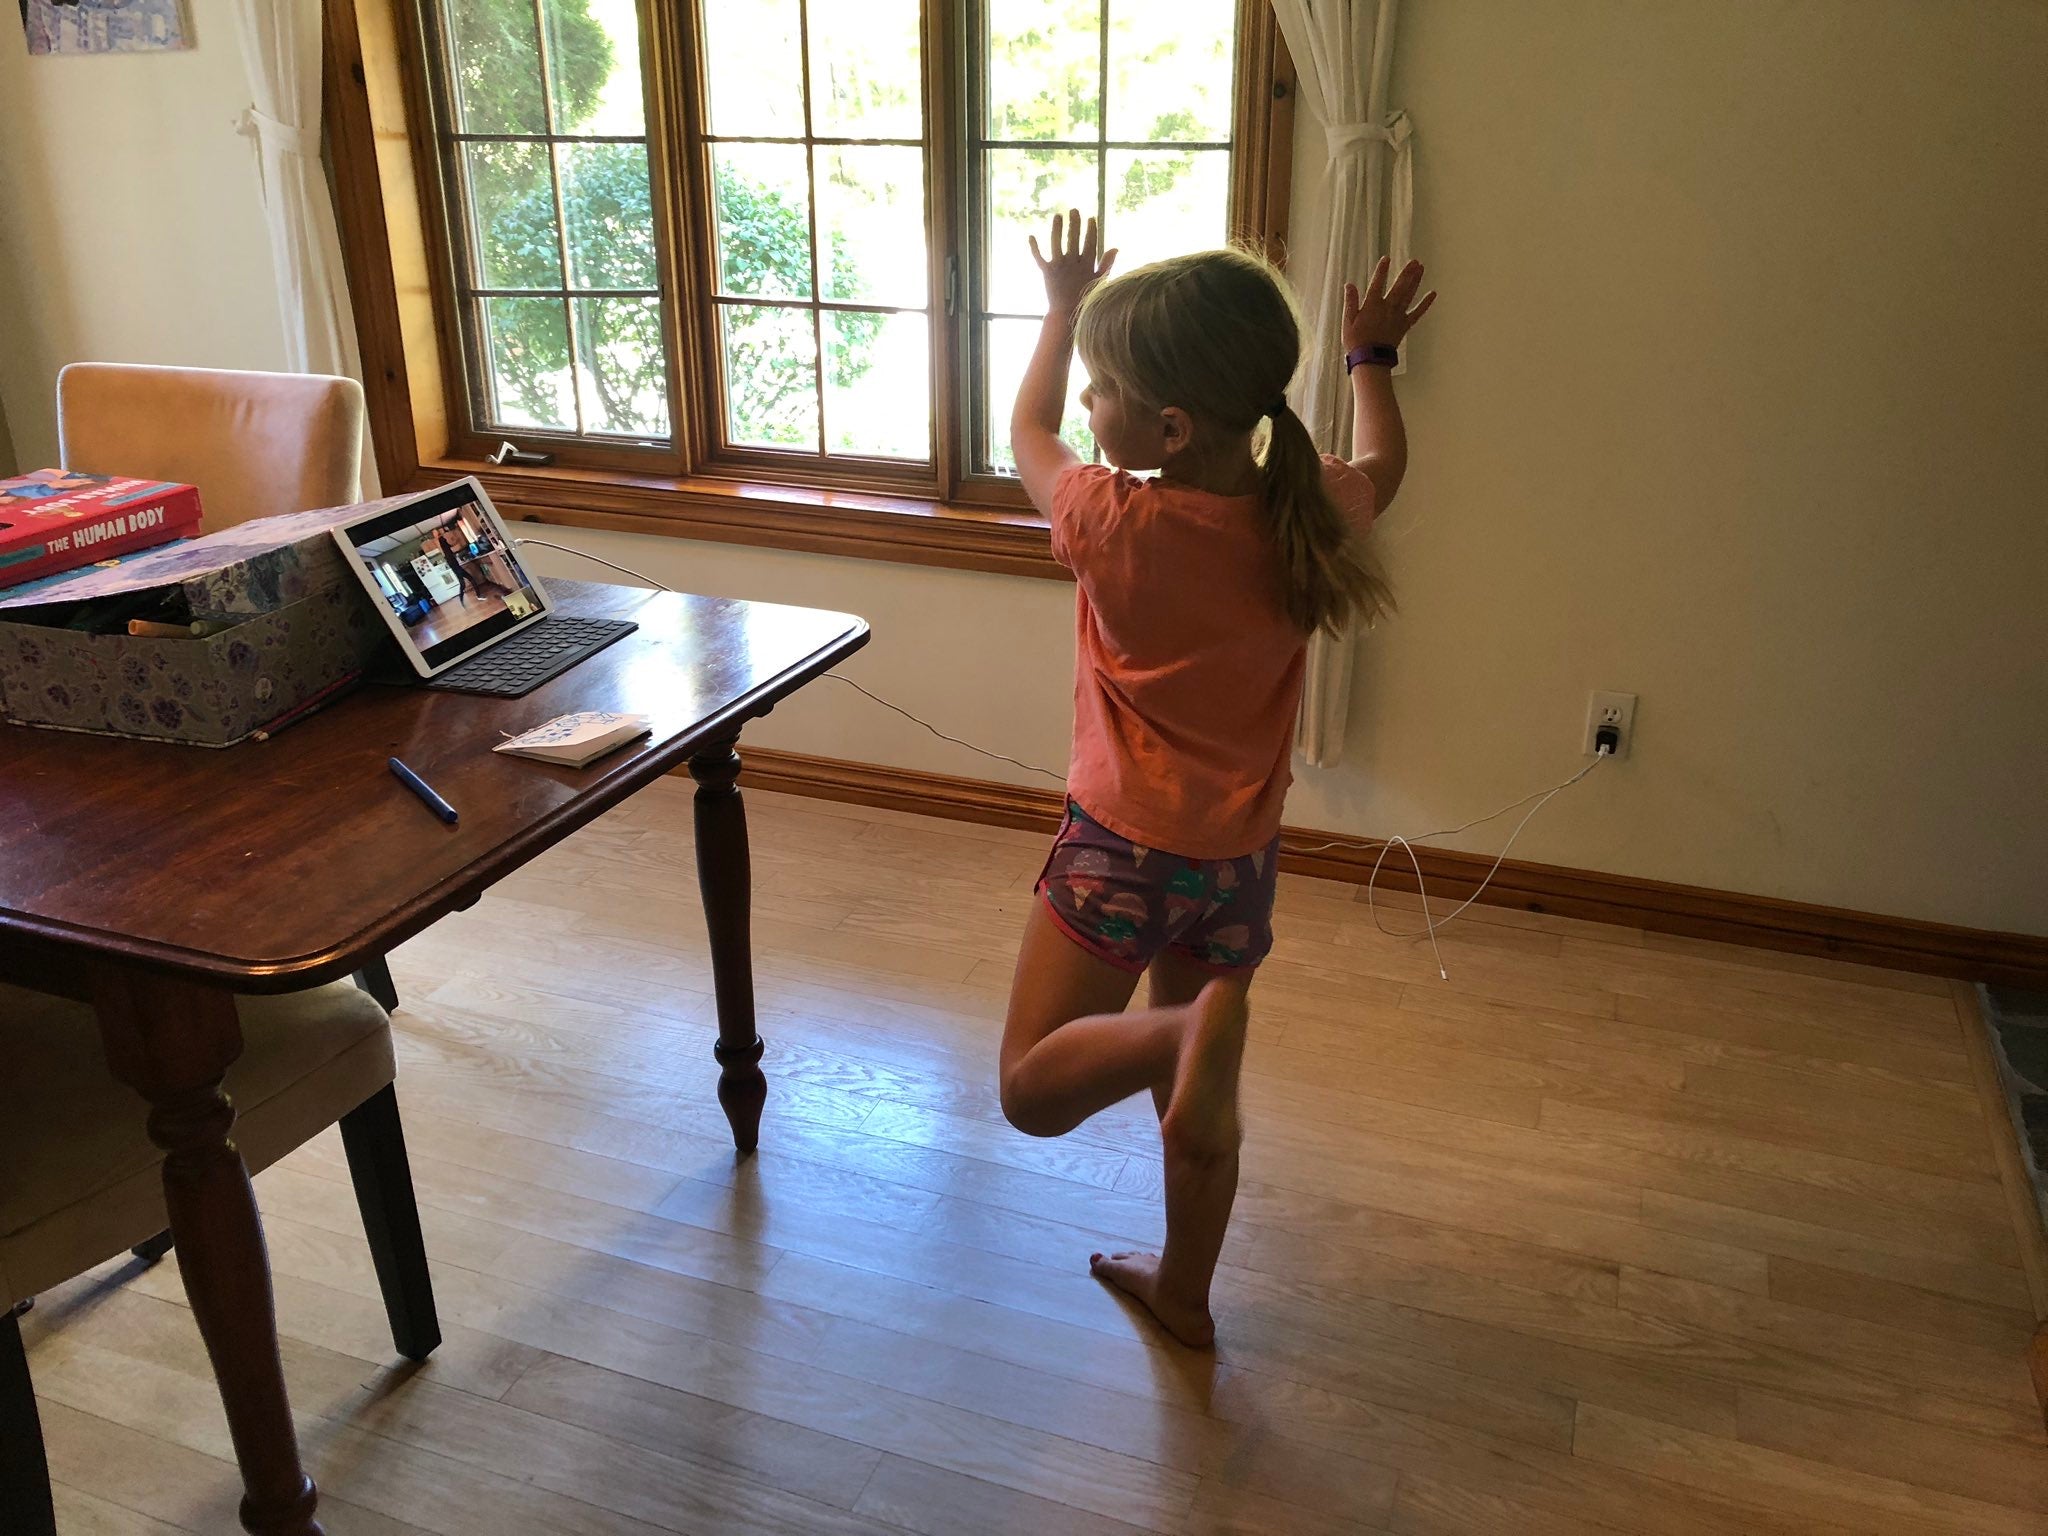 (During the peak of the Covid-19 pandemic restrictions, a student learning virtually from Gurdeep Pandher. In 2021, Gurdeep provided online lessons to nearly 10,000 school students across Canada during a time when they were struggling to find joy in education and their lives.)